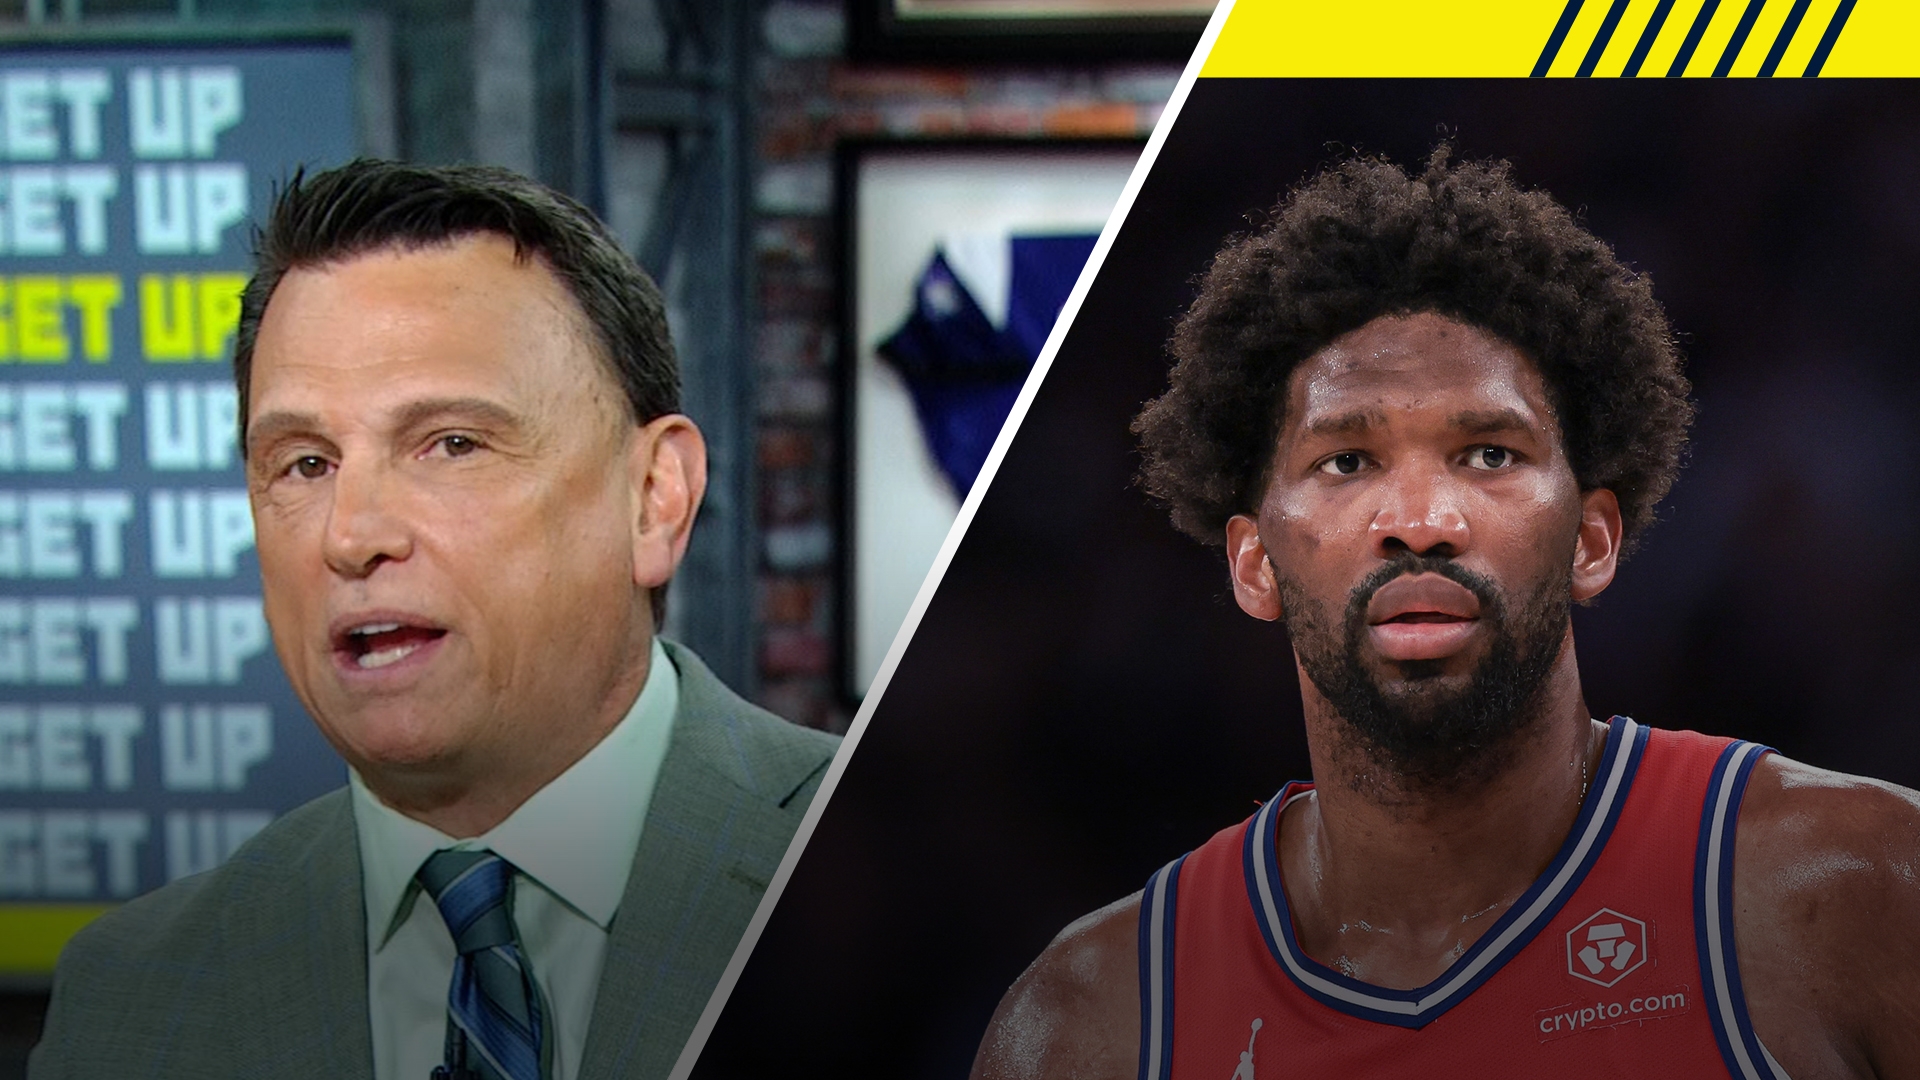 What Legler thinks the 76ers need from Embiid to beat the Knicks